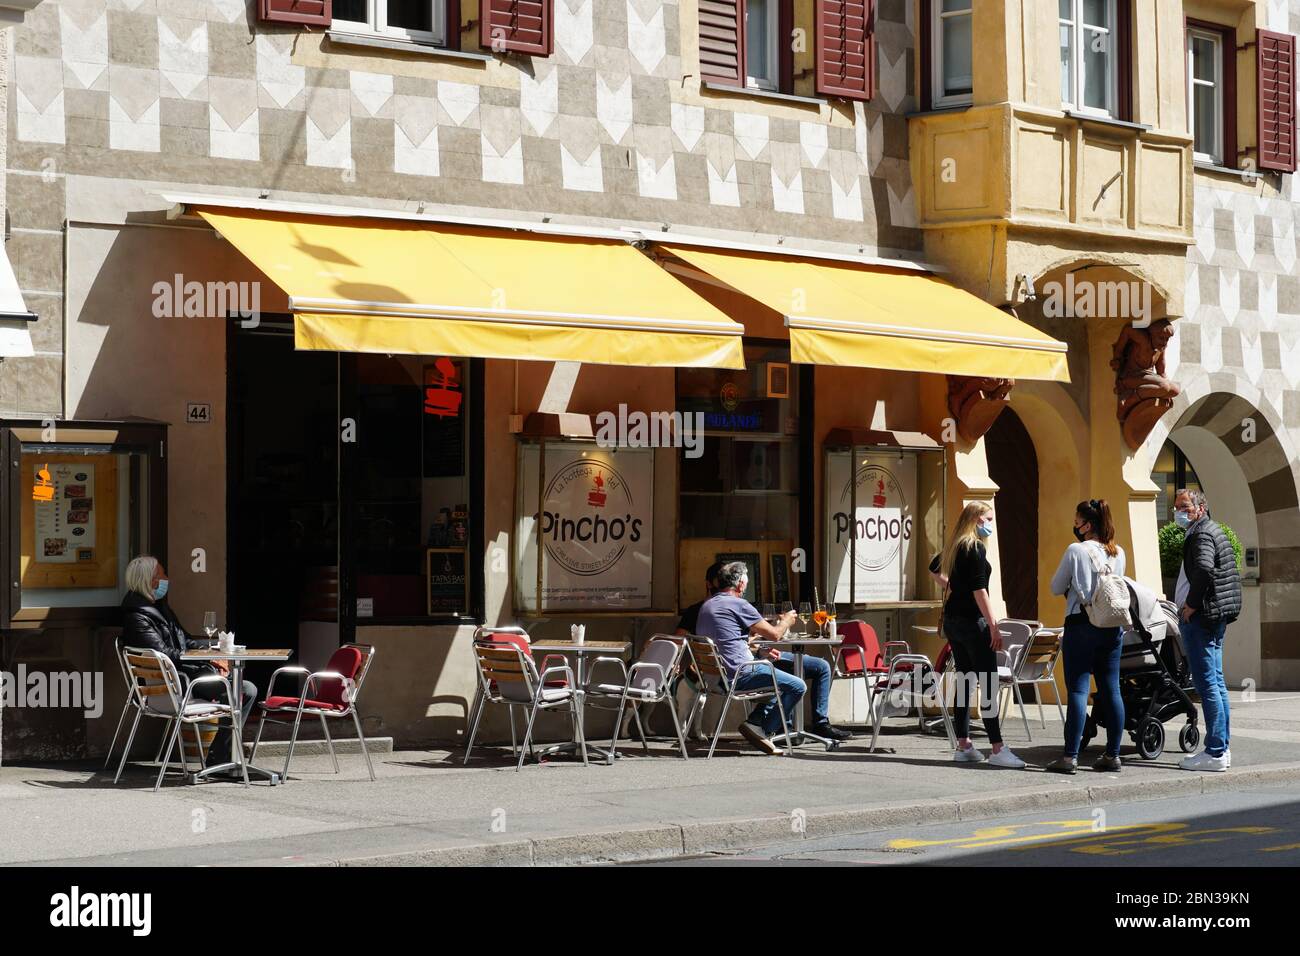 Phase 2 of restrictions because of COVID-19. Some restaurants in Merano, South Tyrol, Italy are already opened. Stock Photo